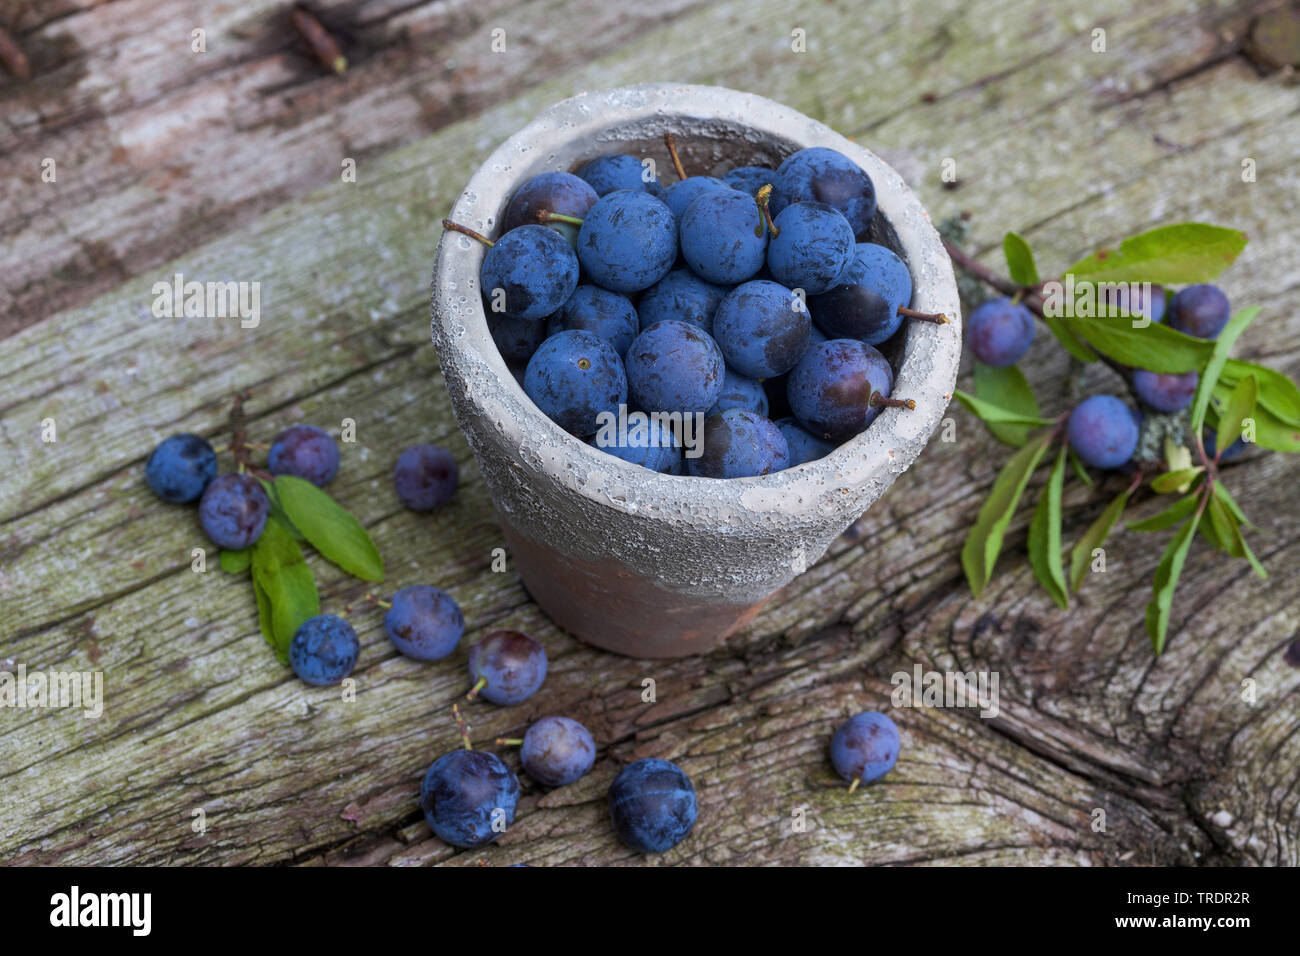 blackthorn, sloe (Prunus spinosa), collectetd fruits in a pot, Germany Stock Photo